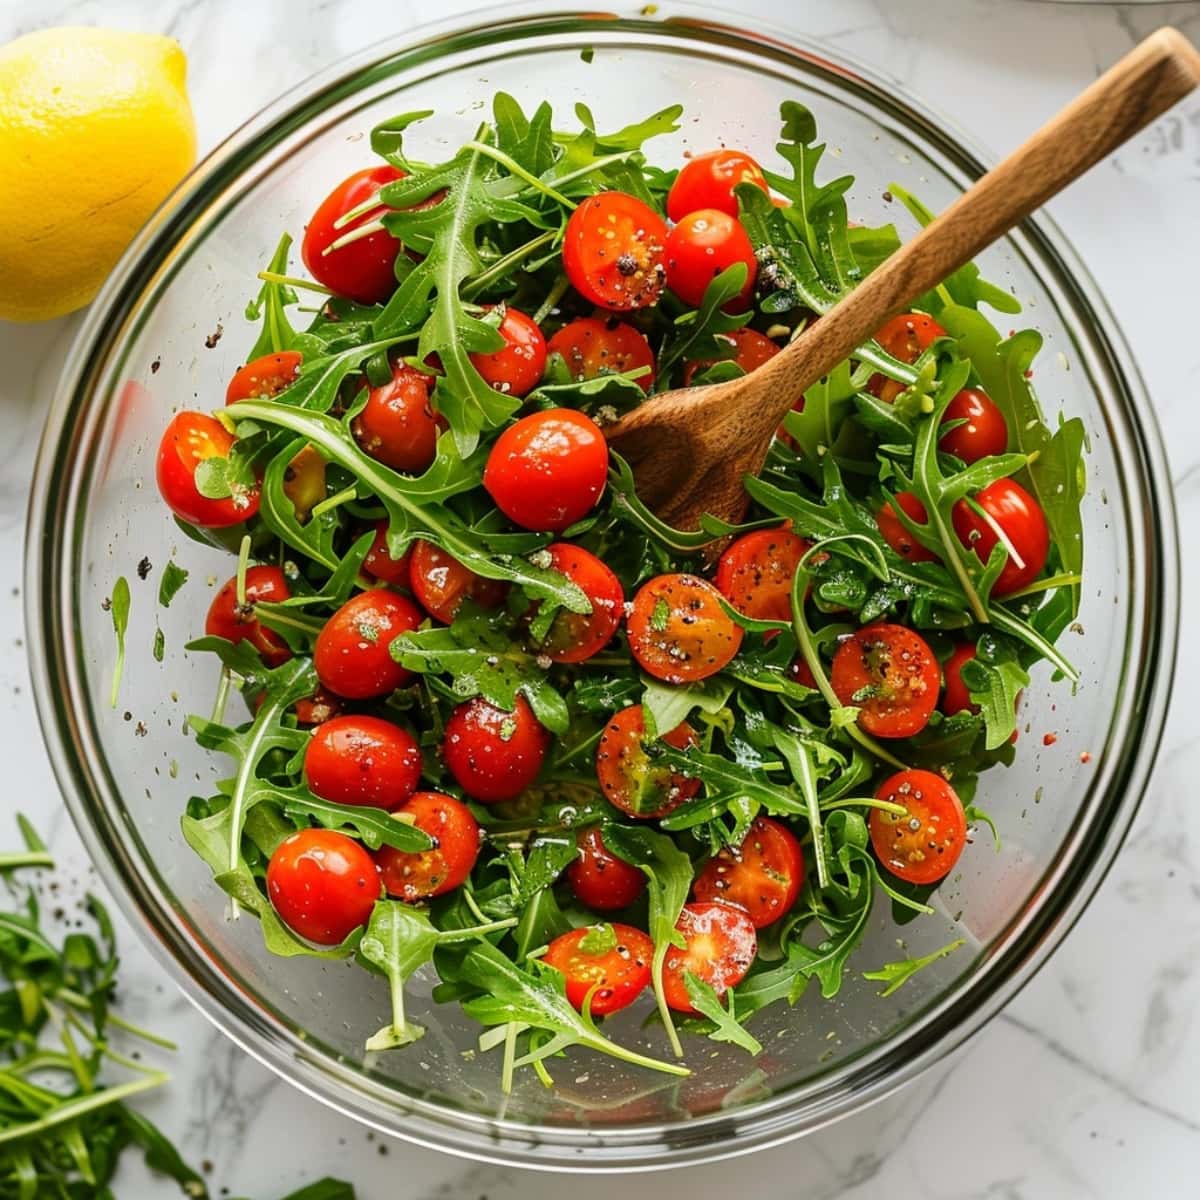 Arugula salad tossed in a glass bowl with lemon dressing.